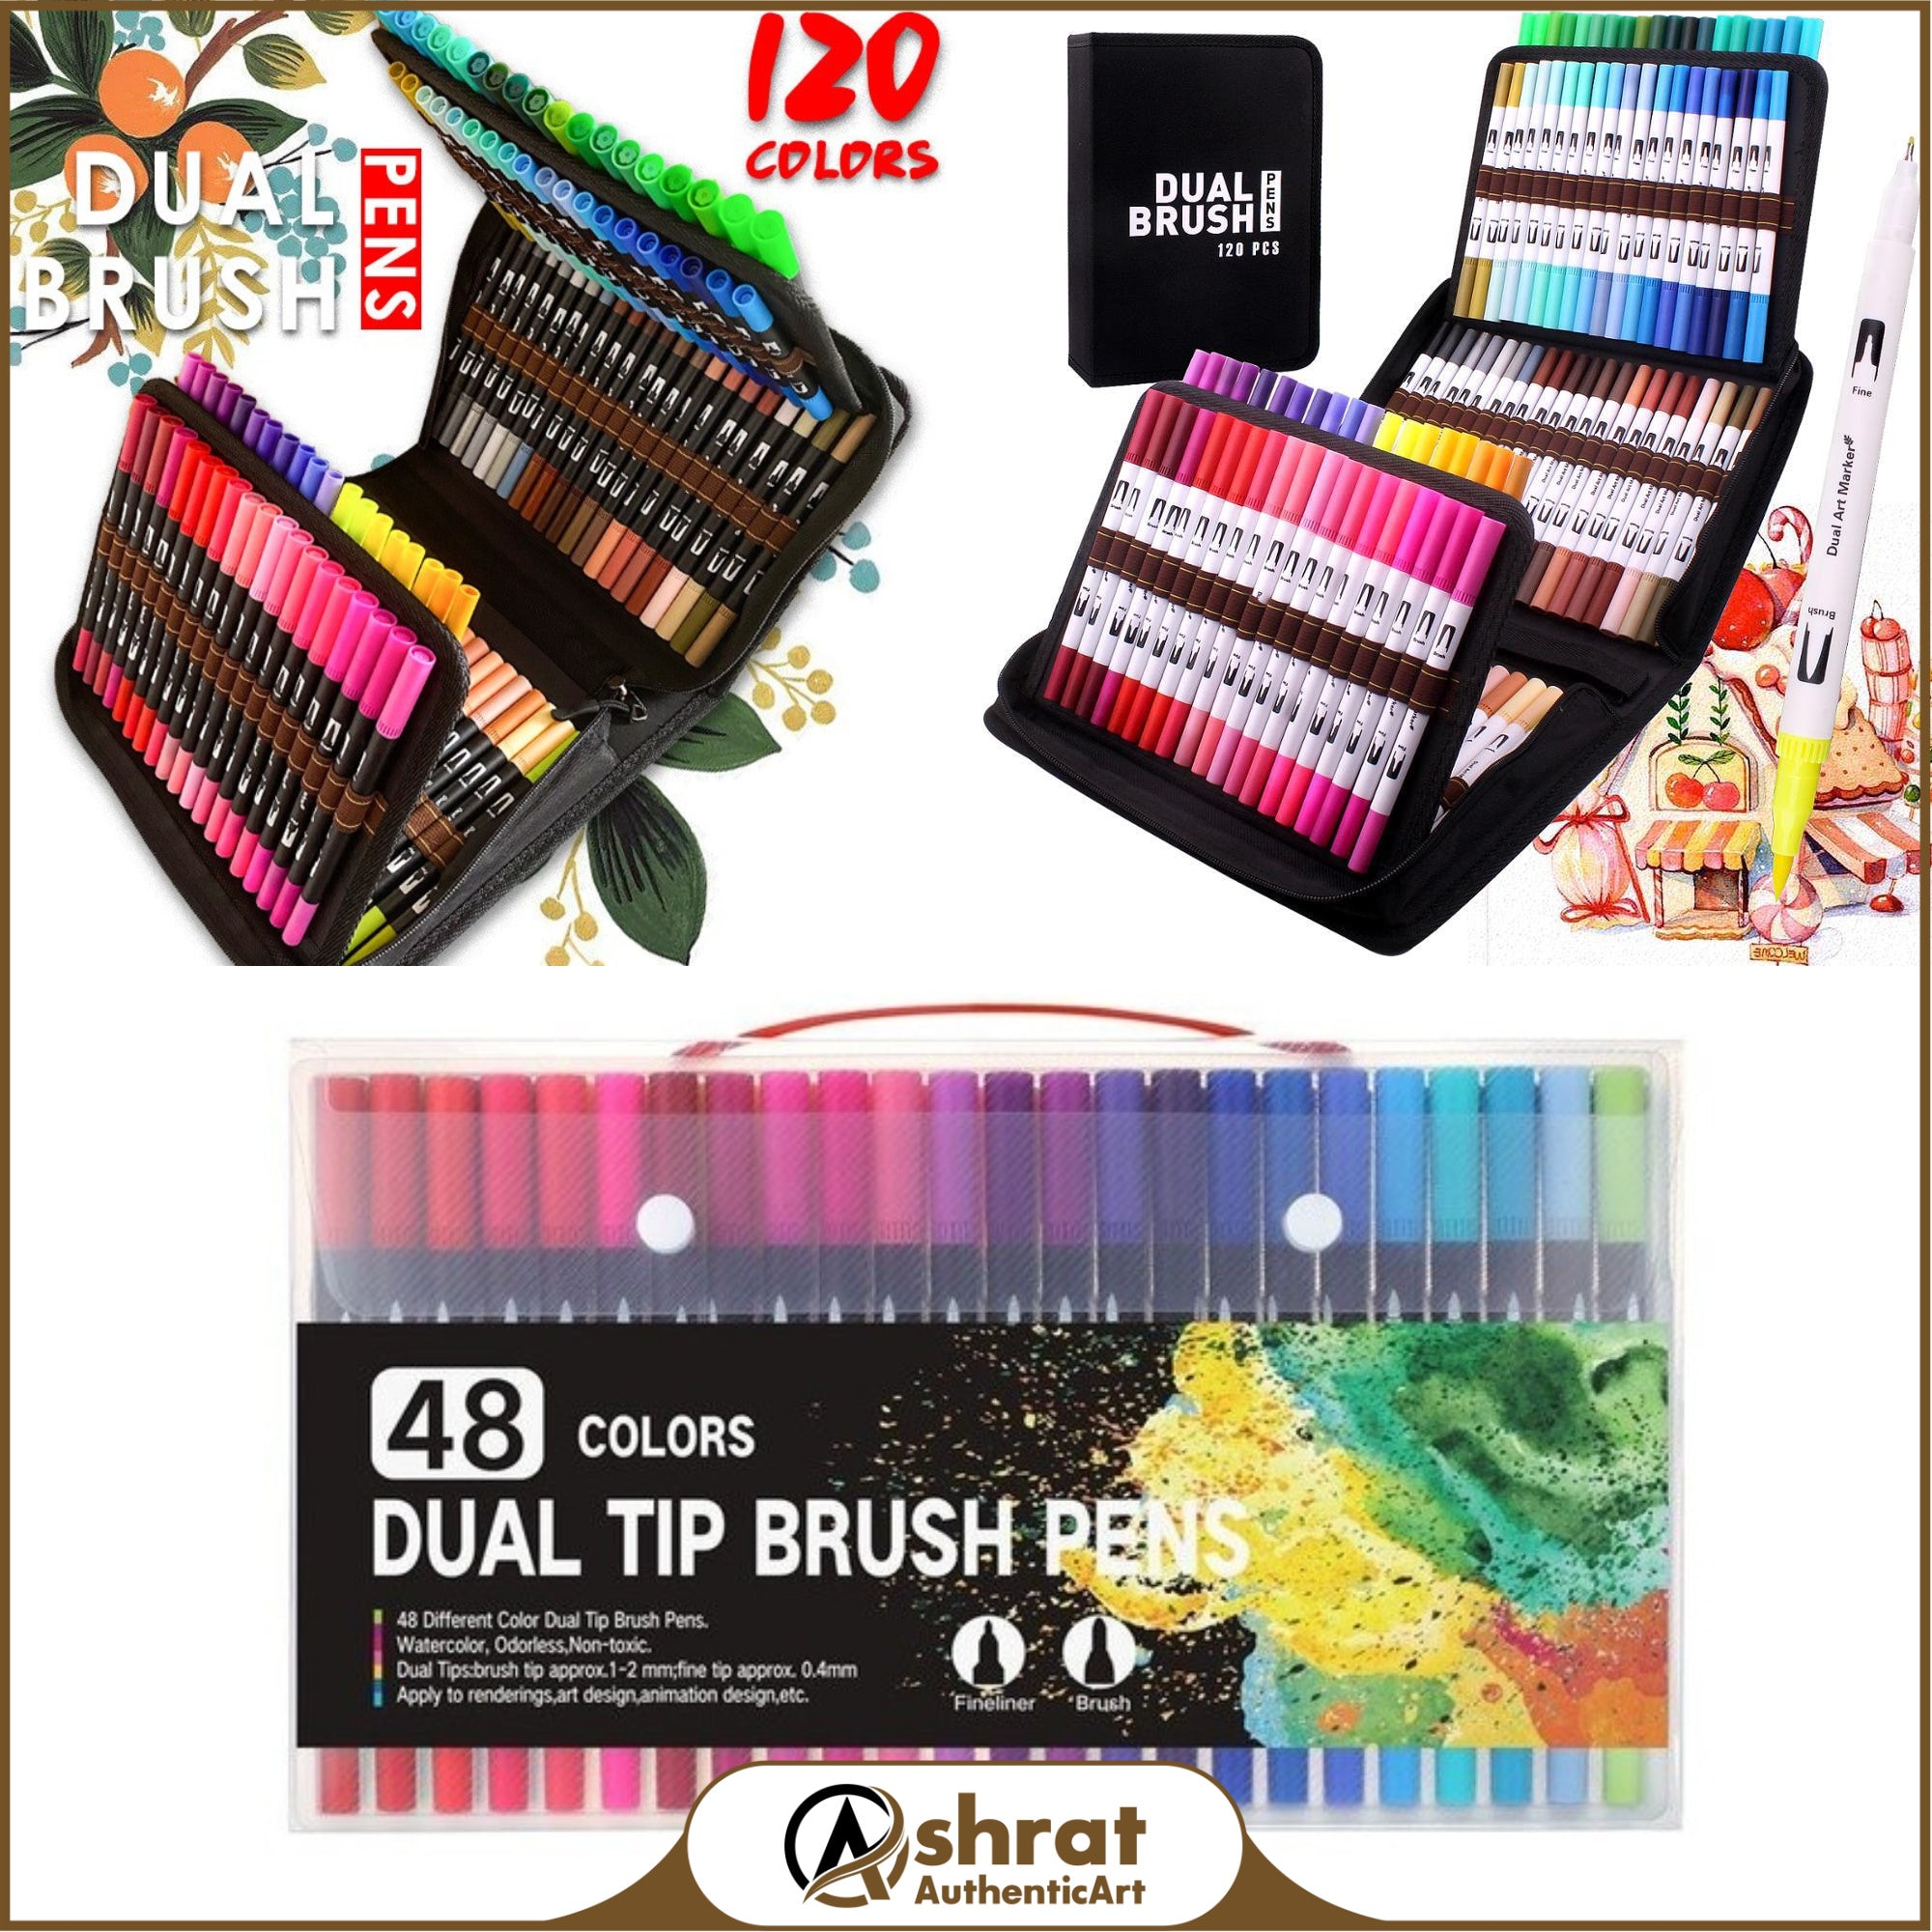 120 Colors Dual Tip Brush Pens Fineliner Tip 0.4mm and Brush Tip 1